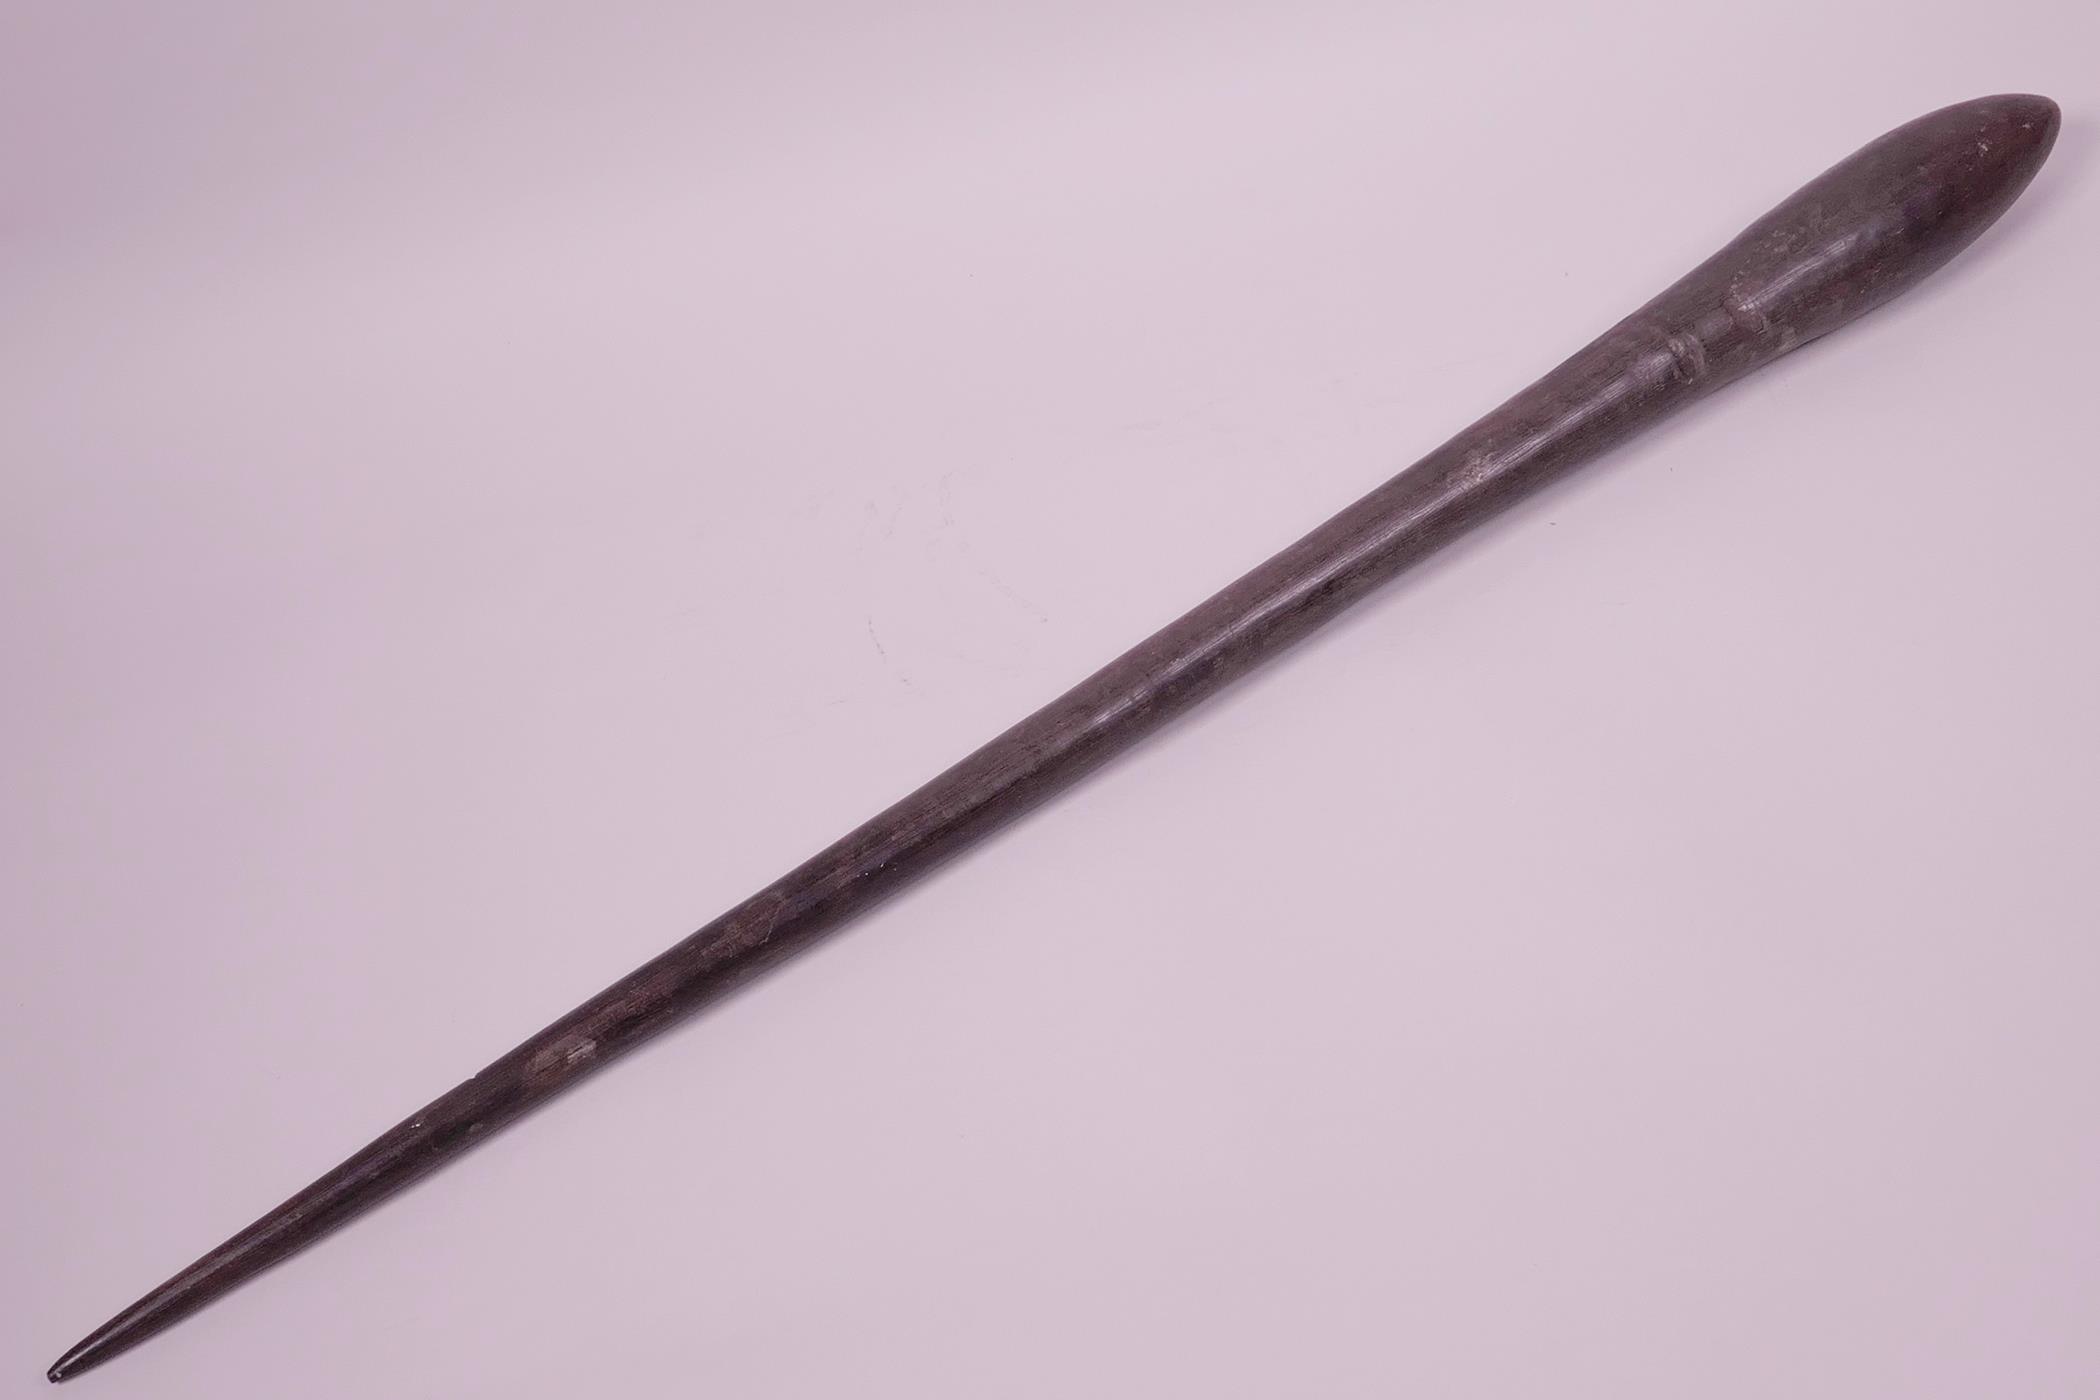 A C19th Pacific Islands tapered hardwood throwing club, 26" long